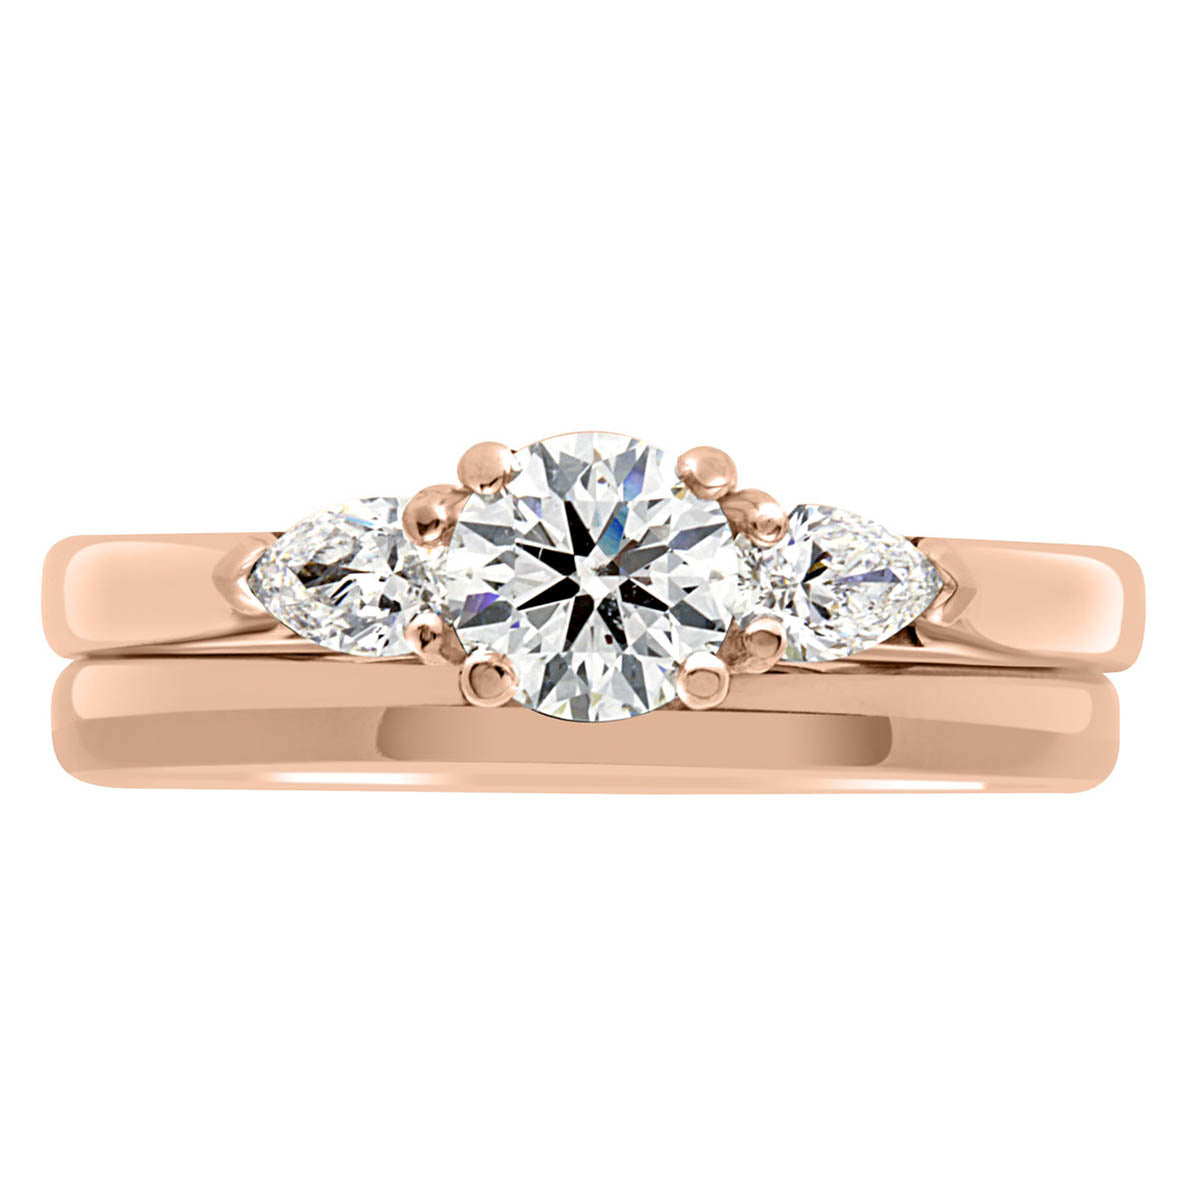 Round and Pear Diamond Ring in rose gold with a plain wedding ring